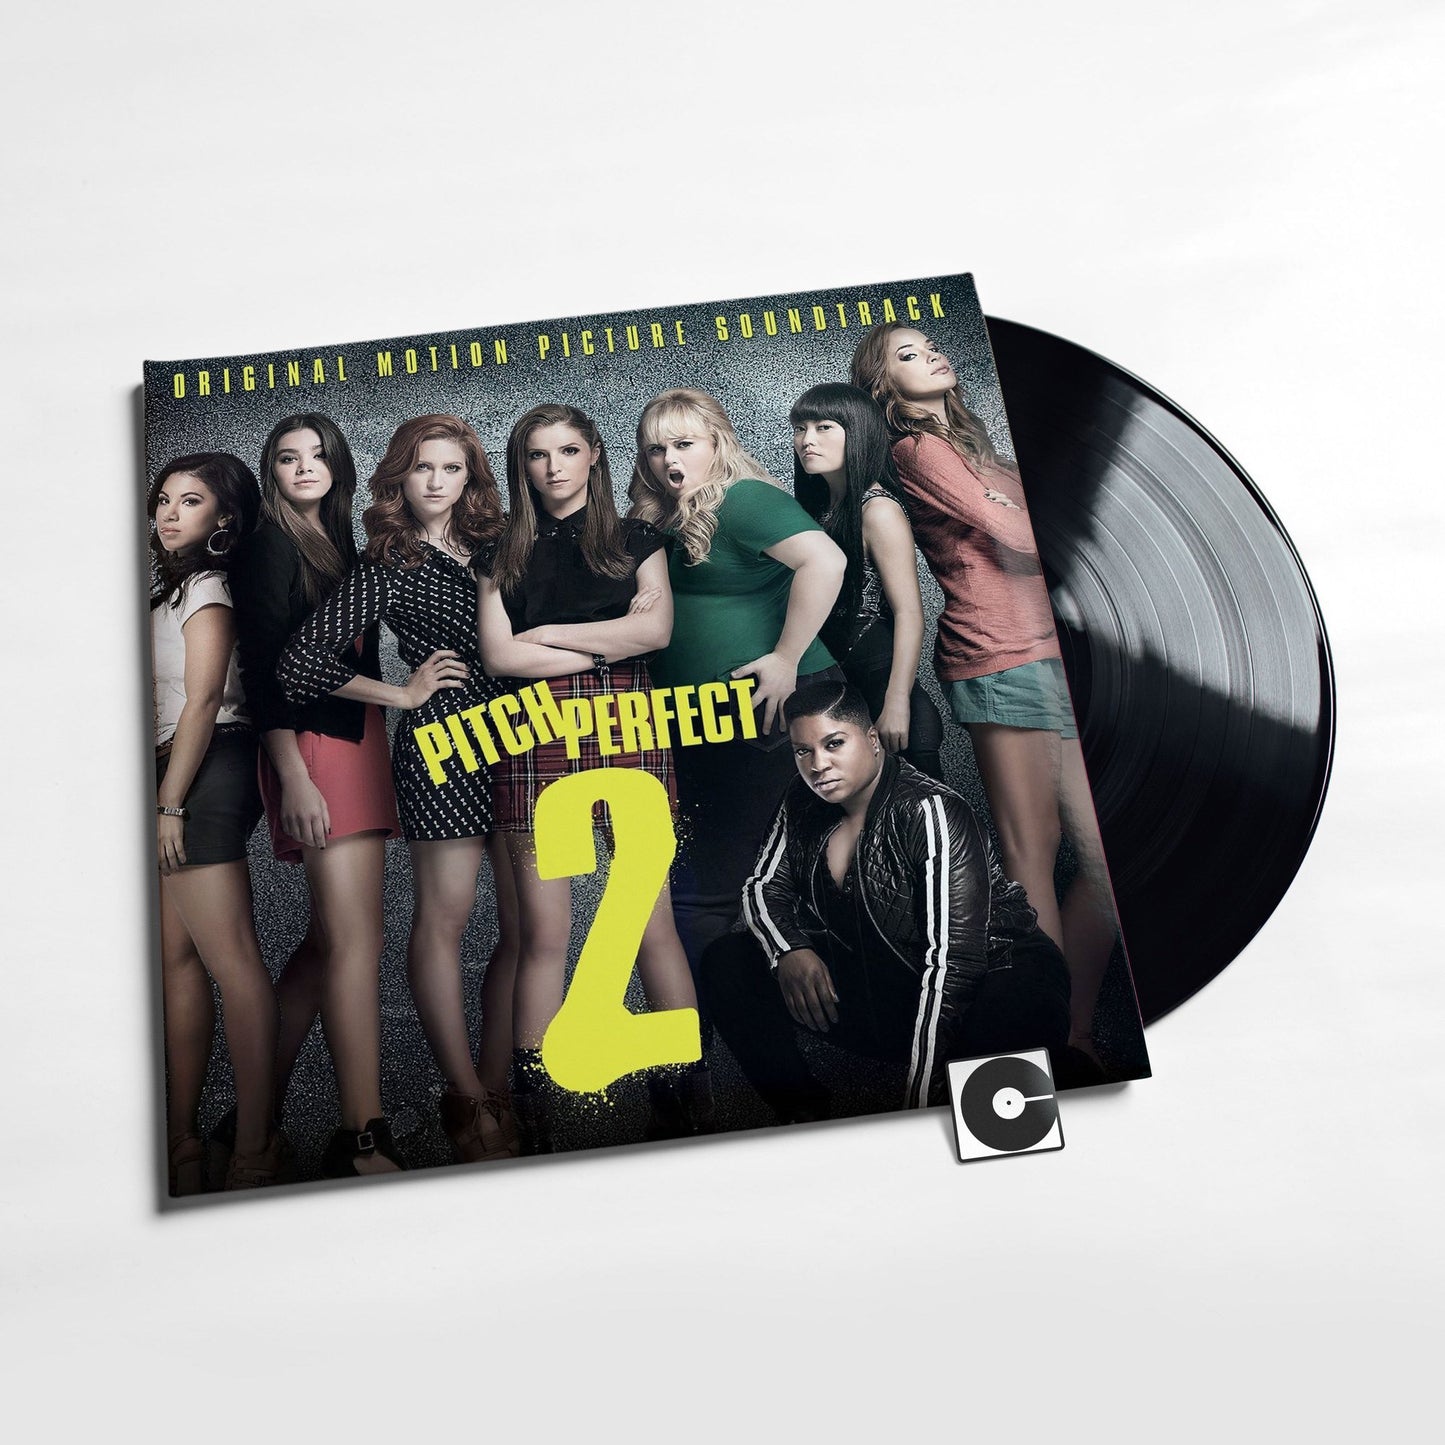 Various Artists - "Pitch Perfect 2 (Original Motion Picture Soundtrack)"